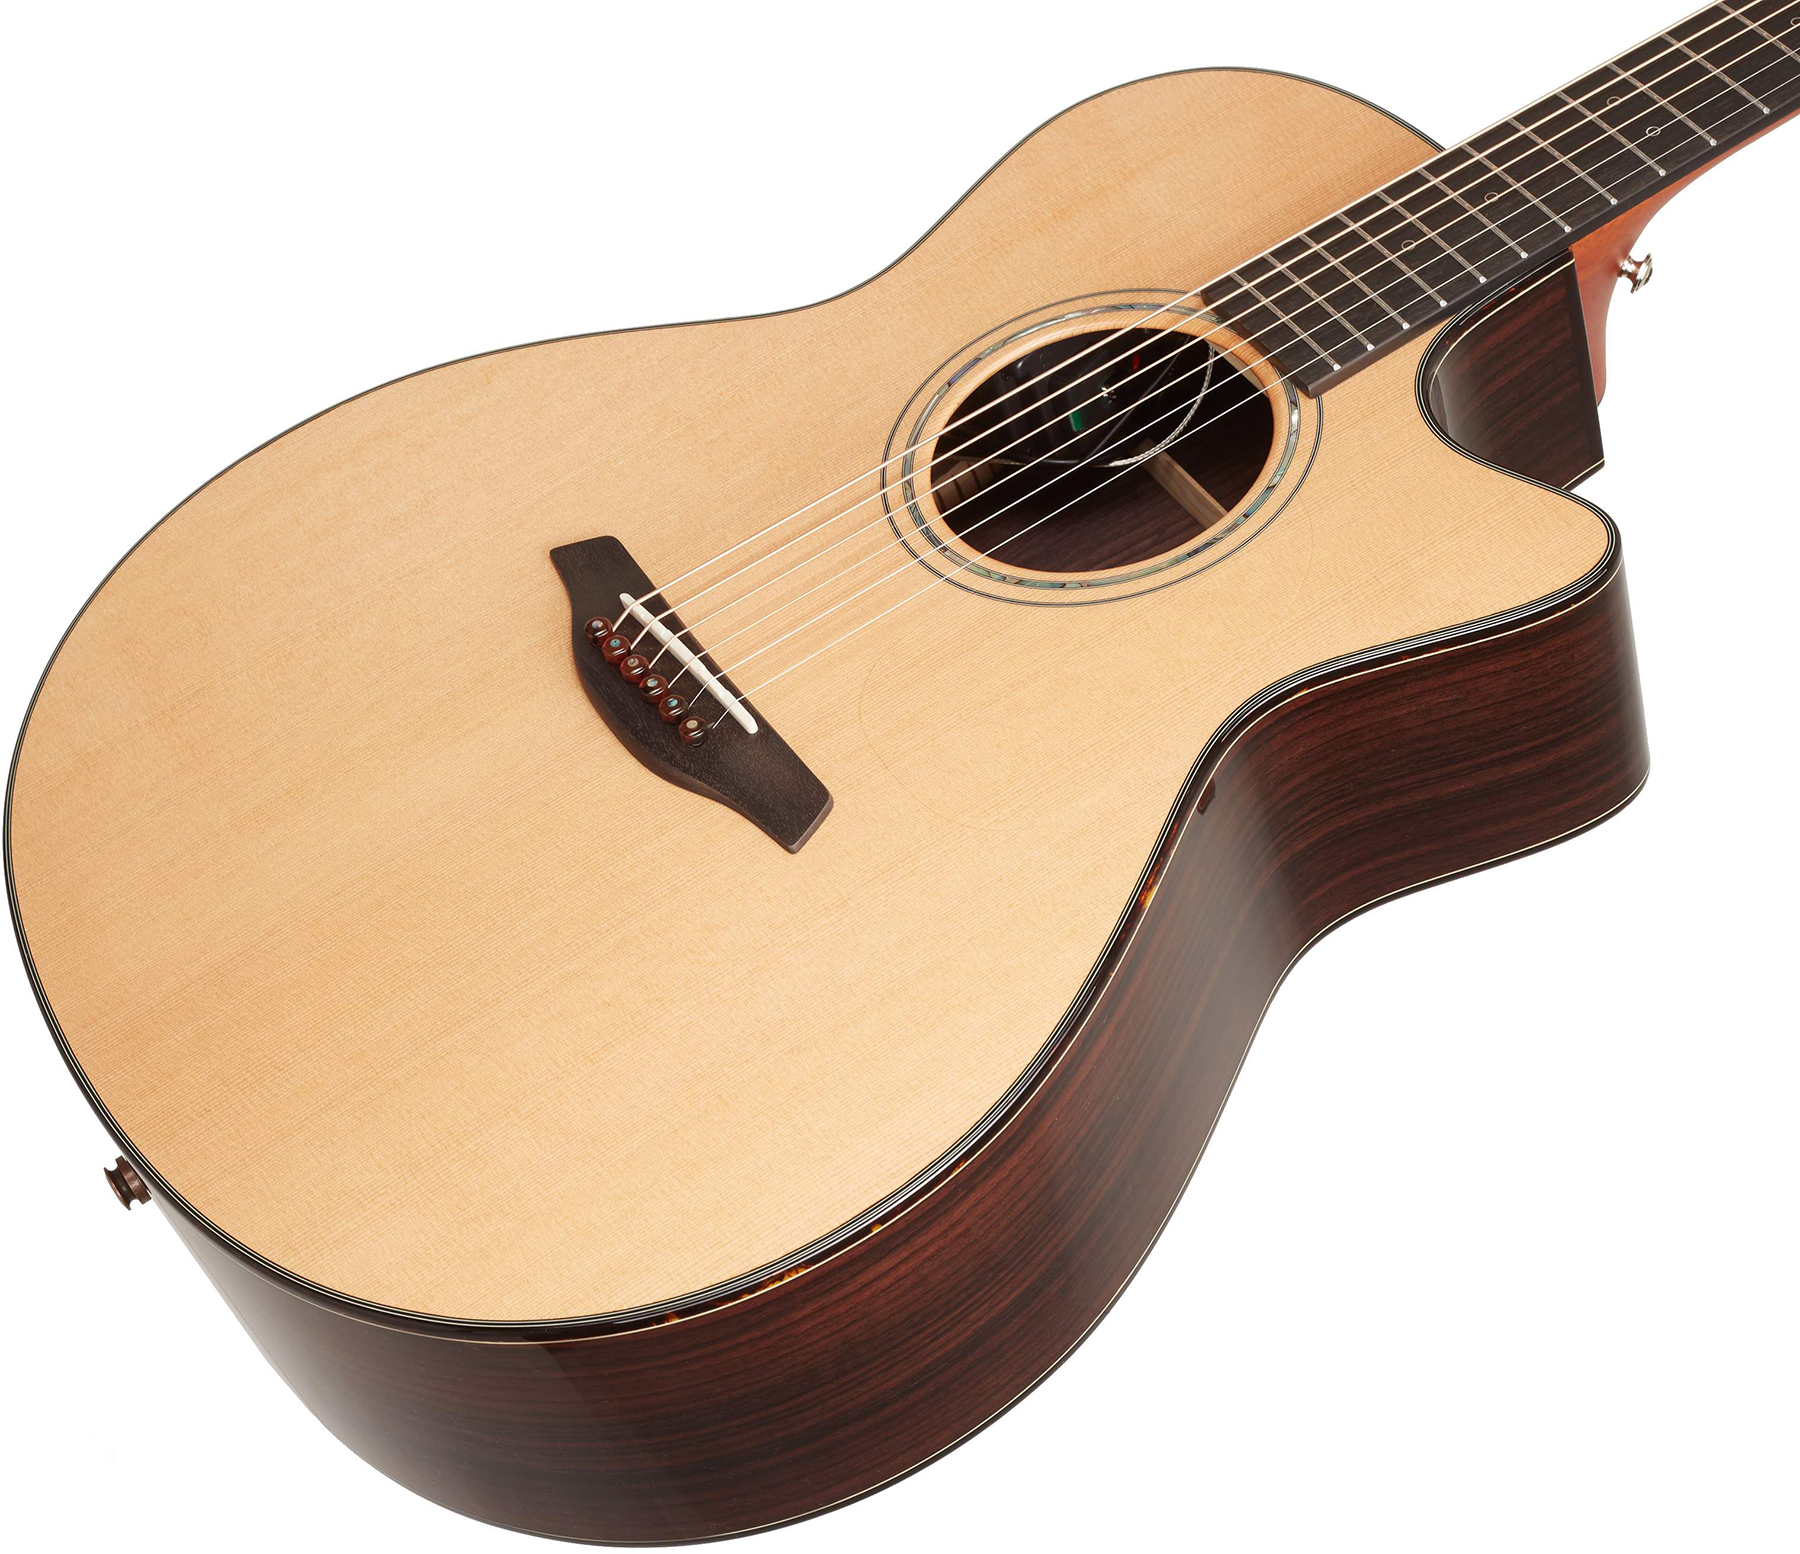 Furch Gc-cr Lrb1 Yellow Grand Auditorium Cedre Palissandre Eb - Natural Full-pore - Electro acoustic guitar - Variation 2